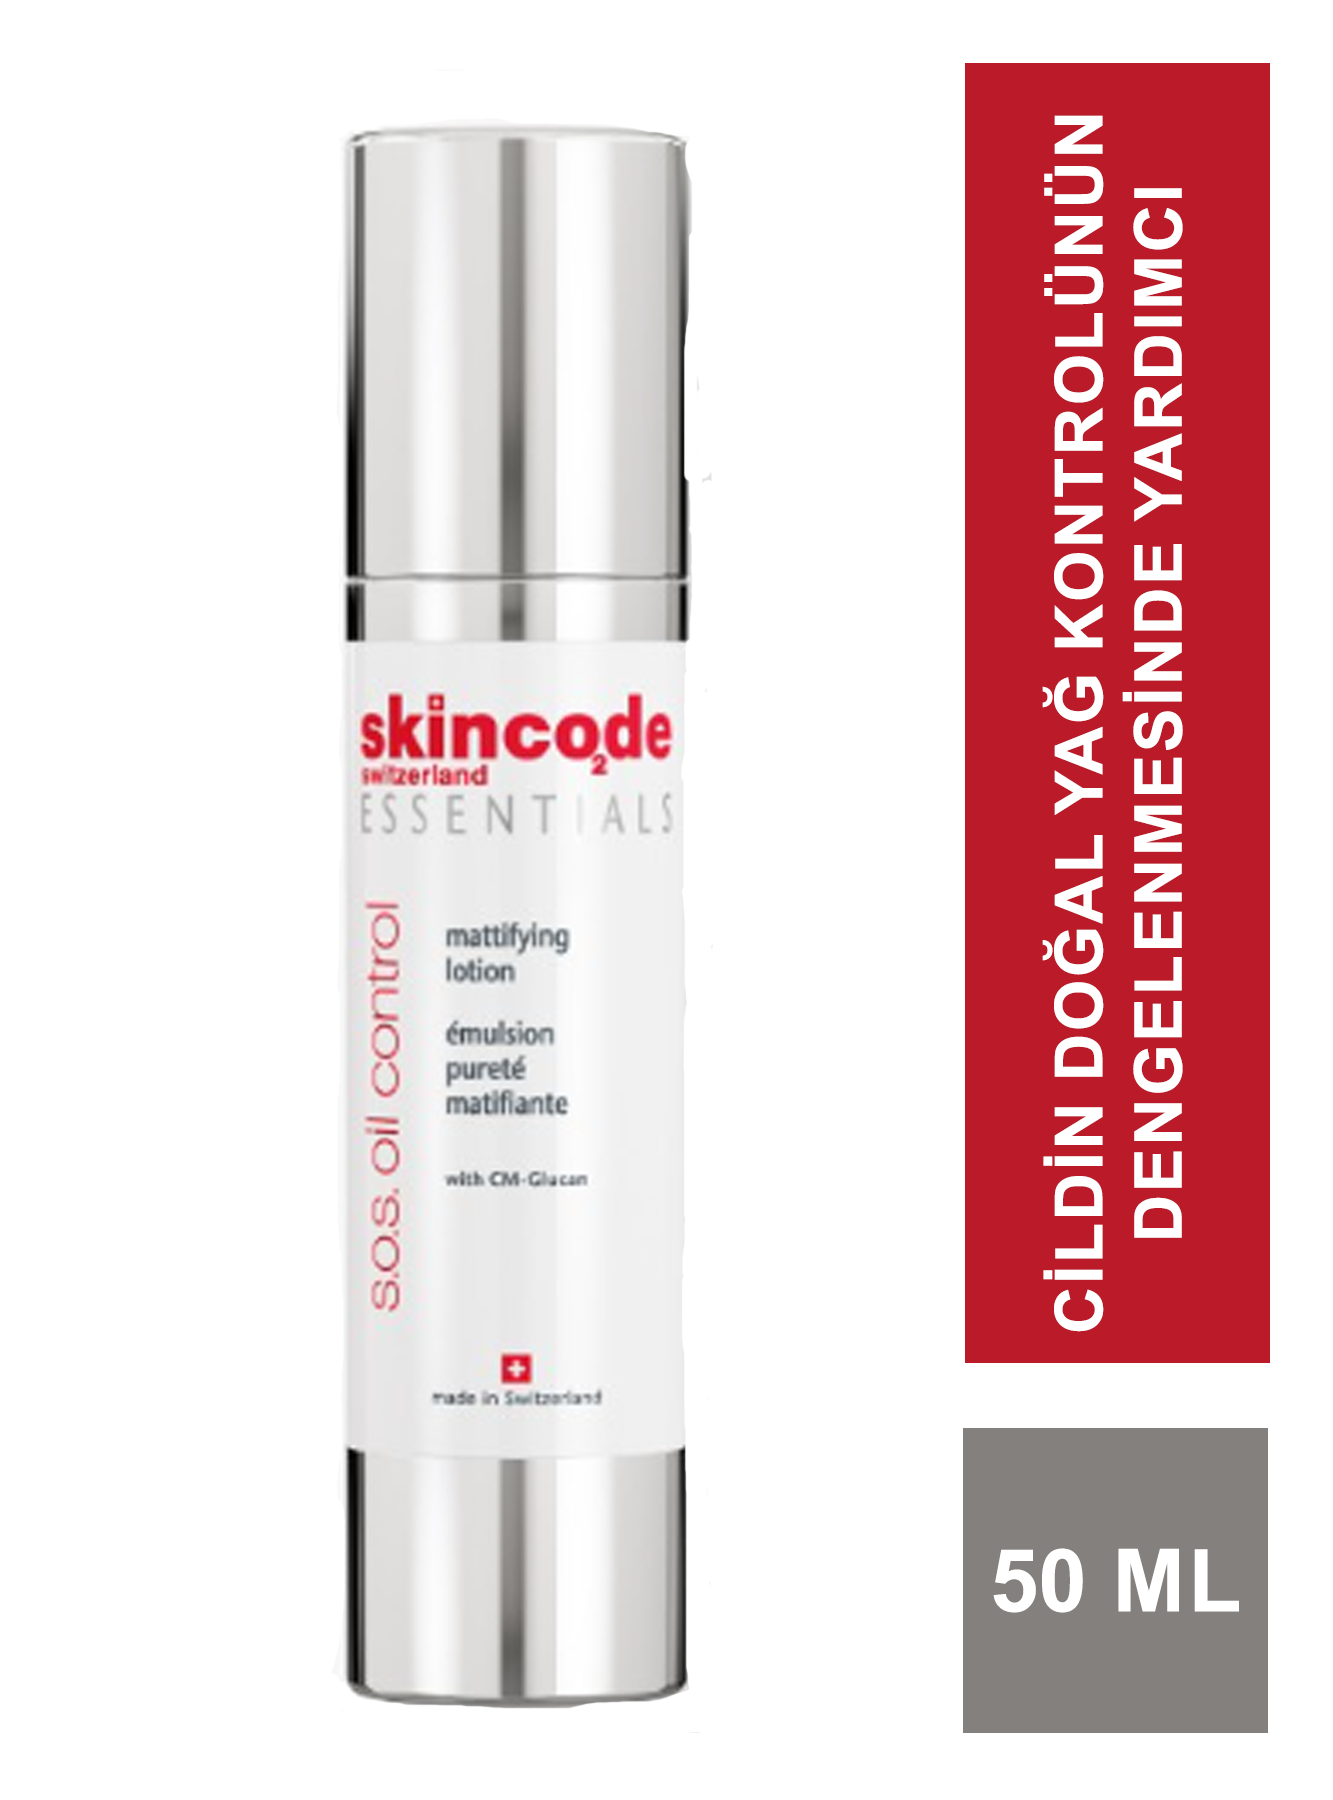 Outlet - Skincode S.O.S. Oil Control Mattifying Lotion 50 ml (S.K.T 08-2024)